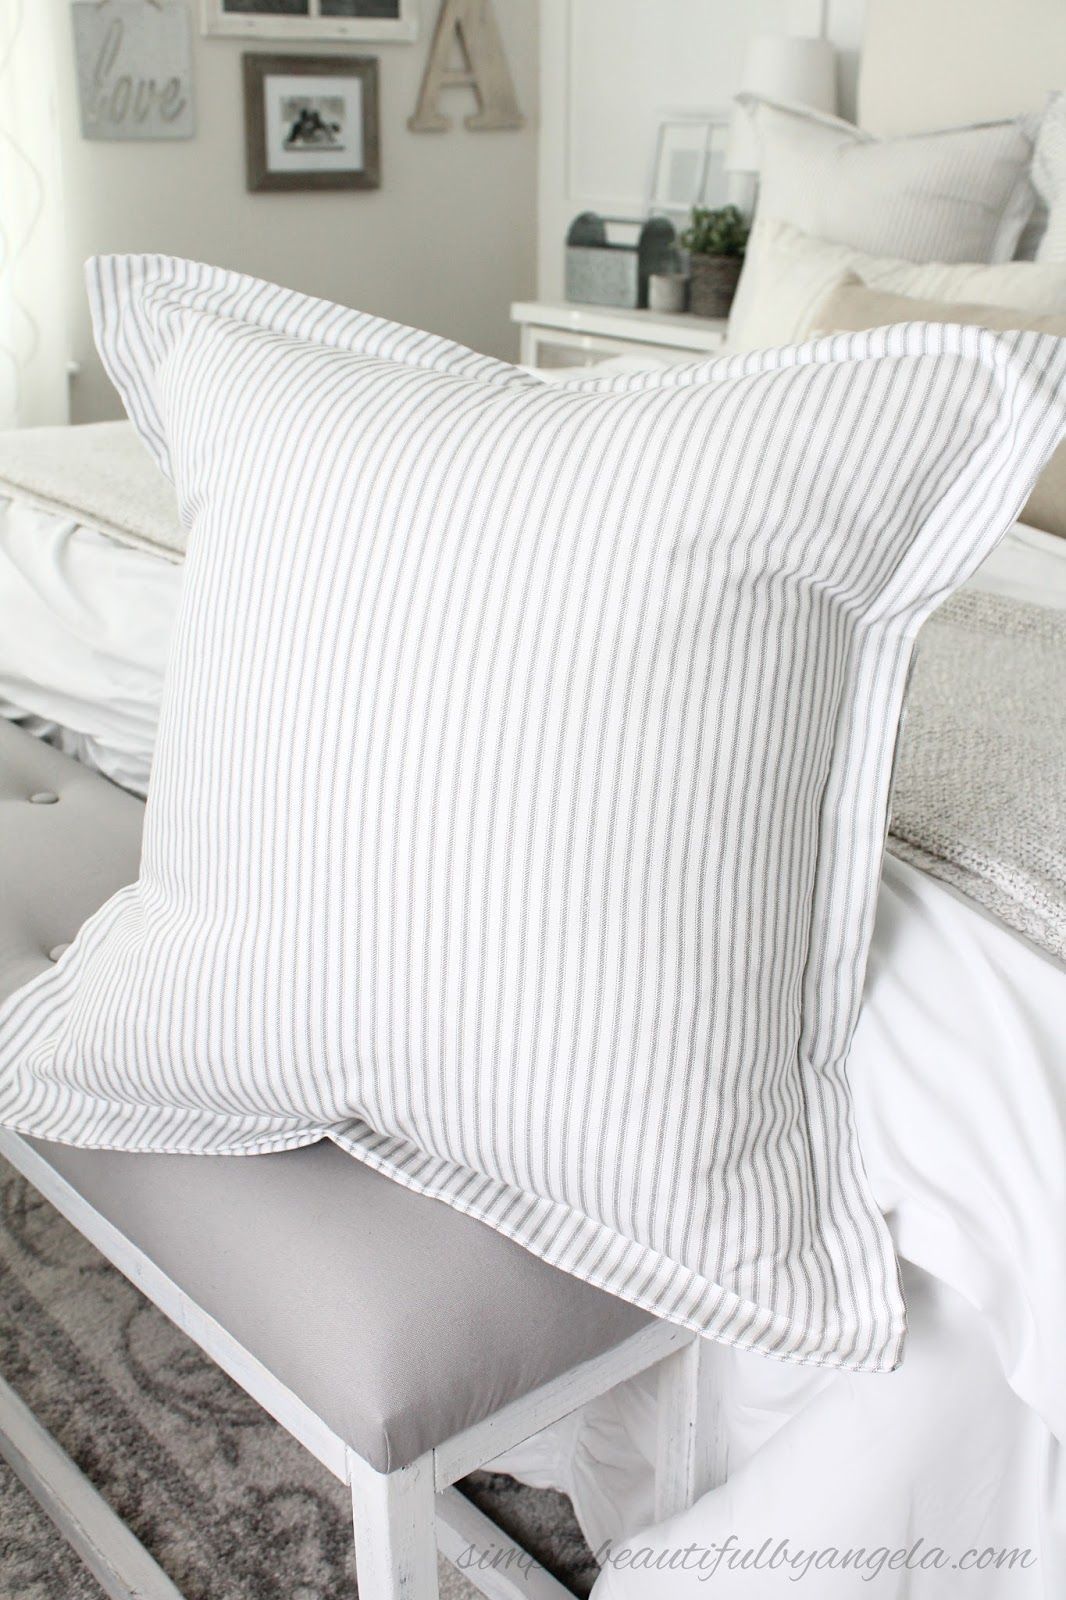 DIY Euro Pillows with Flanges | Simply Beautiful By Angela - DIY Euro Pillows with Flanges | Simply Beautiful By Angela -   19 diy Pillows couch ideas